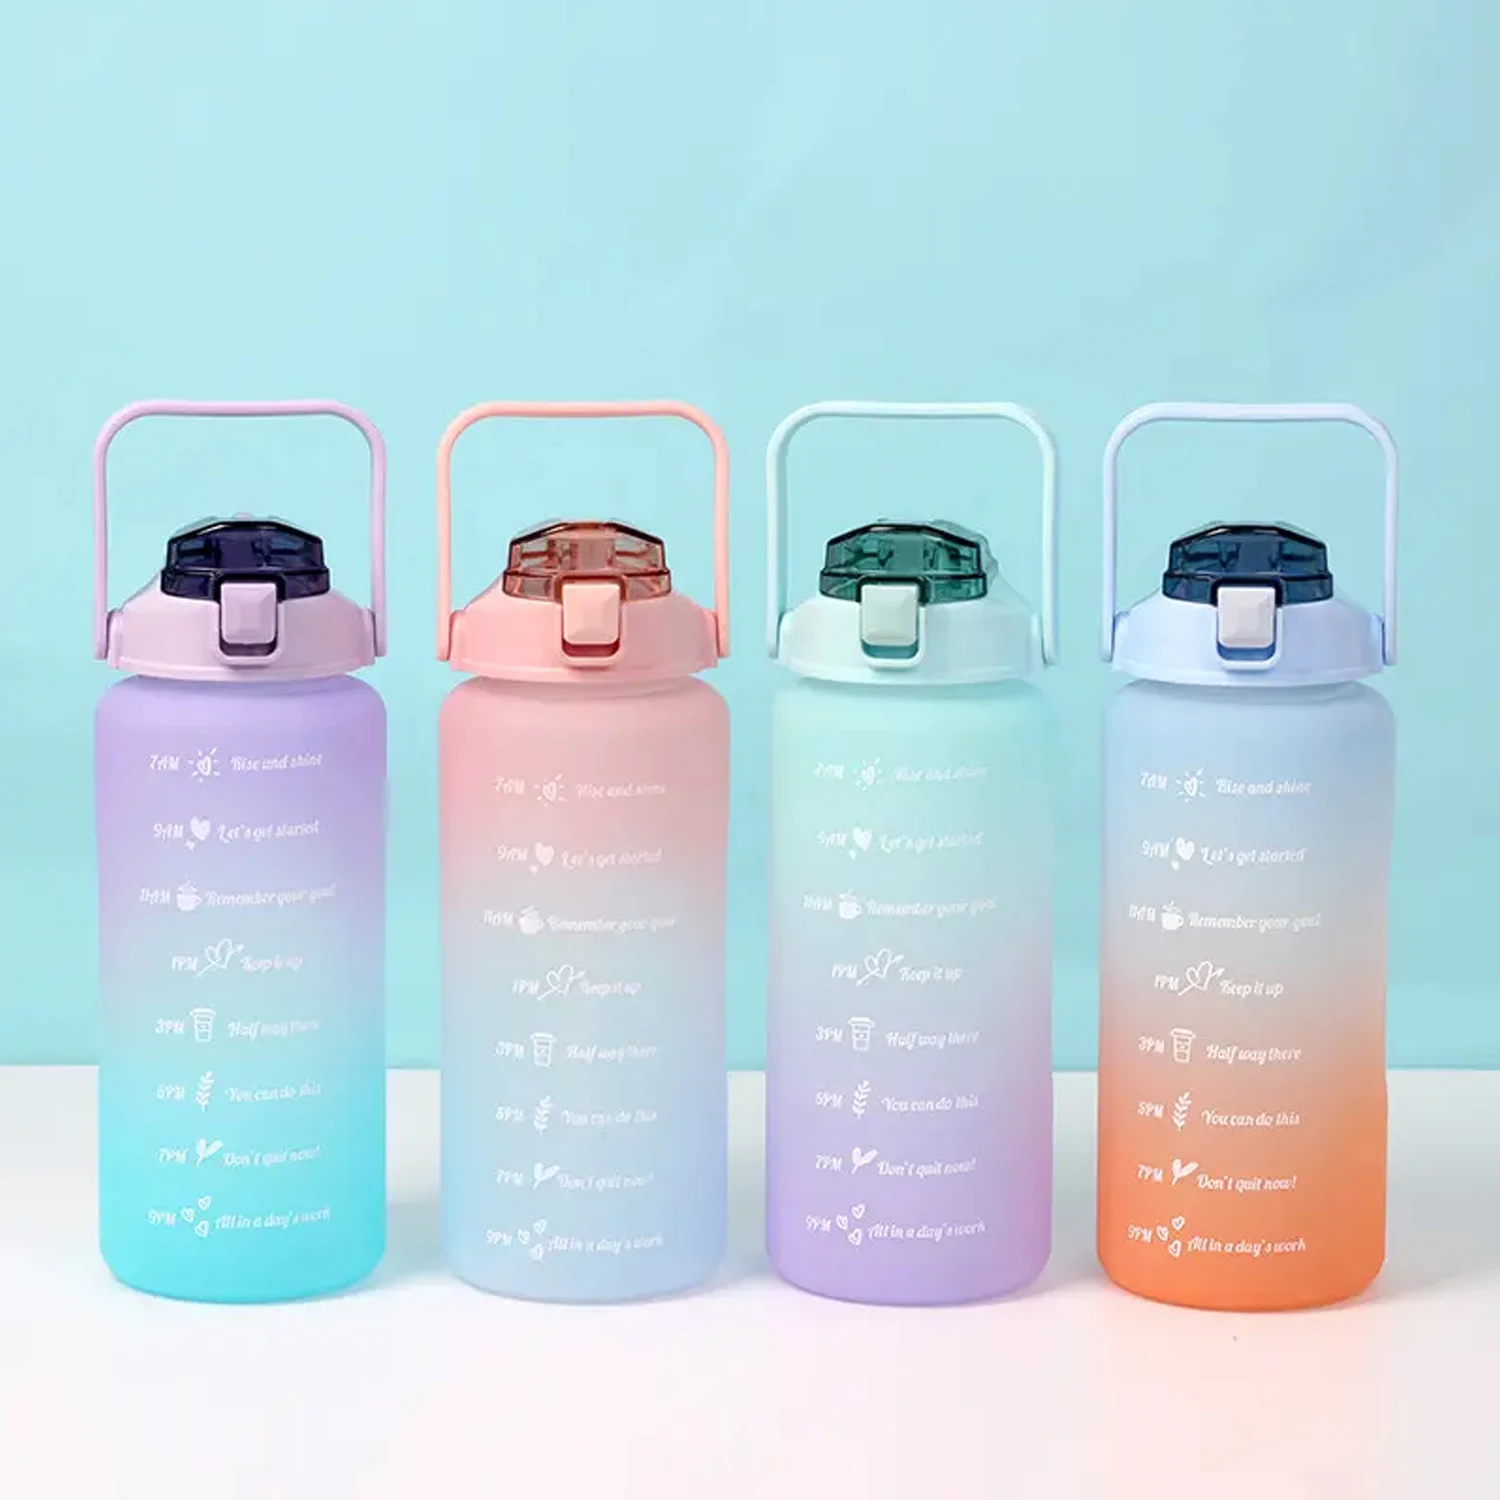 https://ae01.alicdn.com/kf/Aa33a2c4097514a52b6f7d178919806dbM/Motivational-Water-Bottle-Degrad-Colors-2-Litre-Frosted-Body-with-Lid-Squeeze-Portable-for-Gym-and.jpg